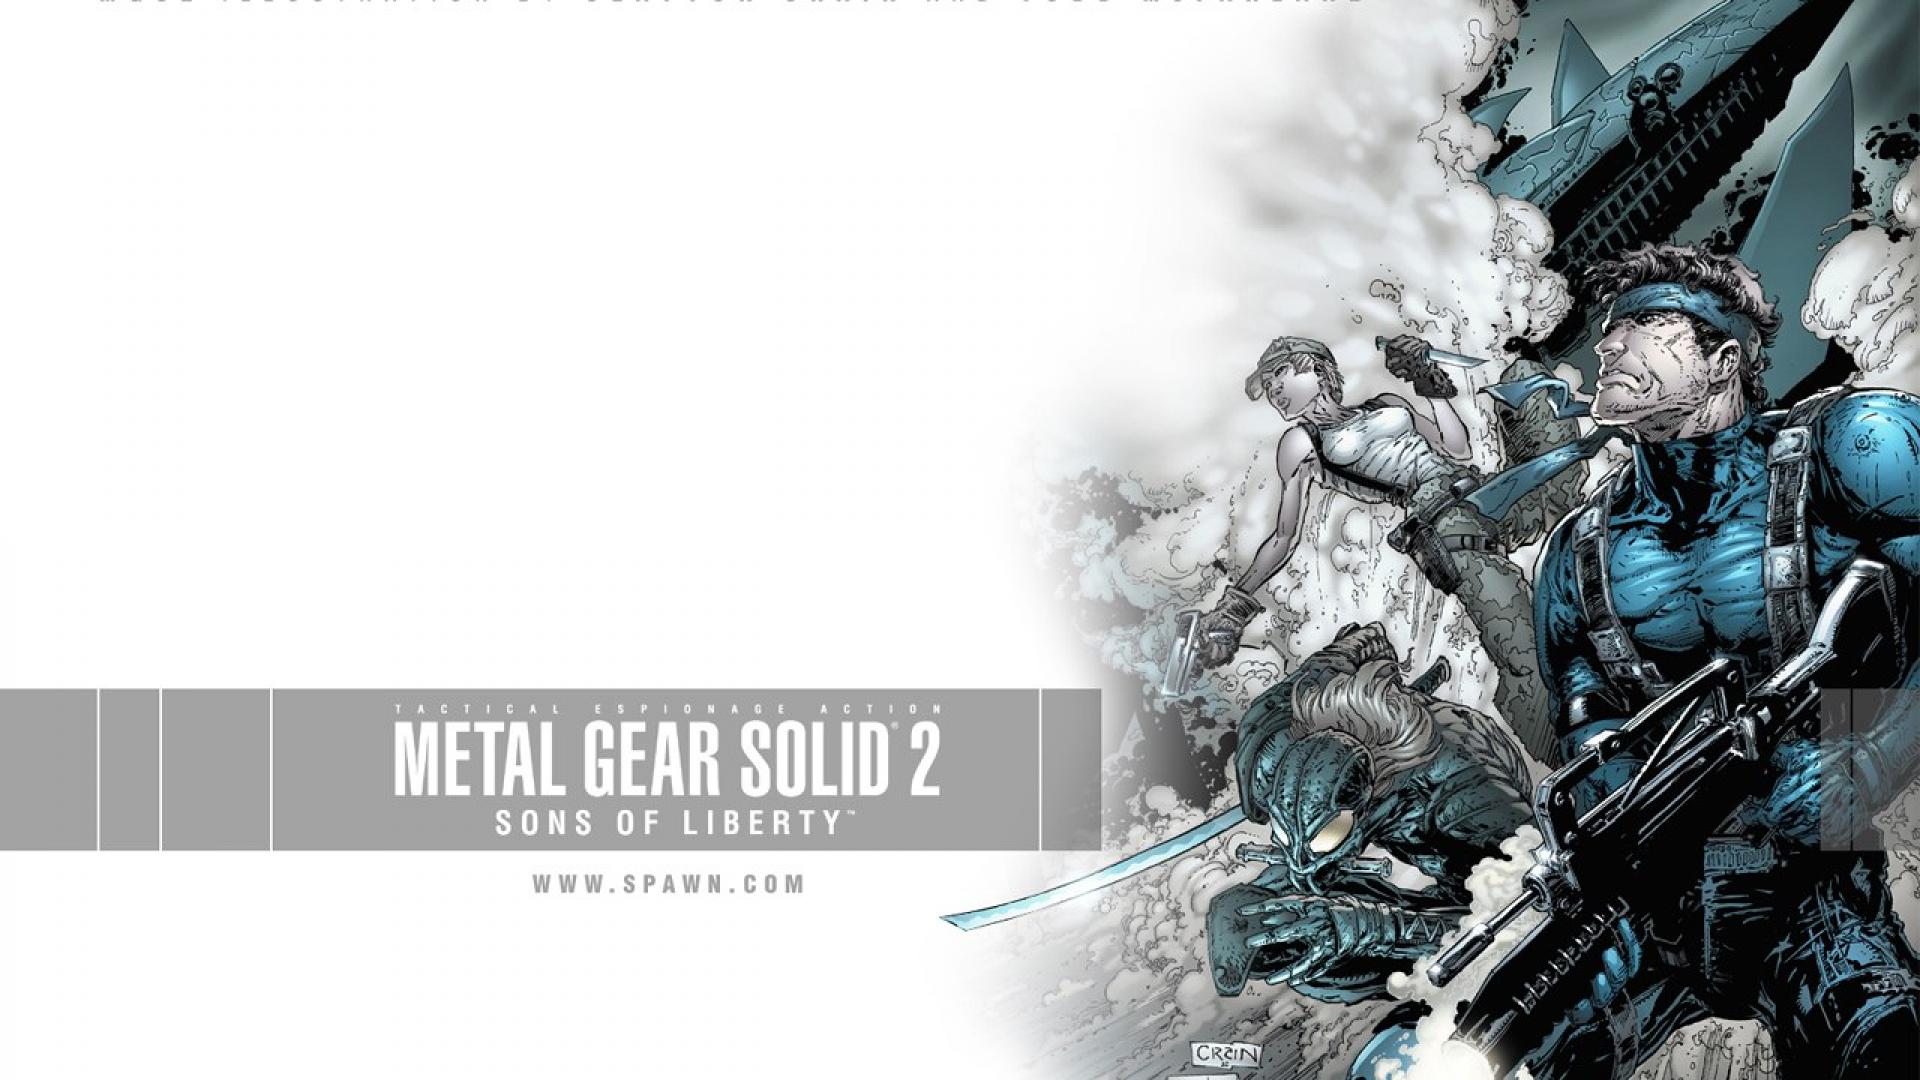 Free Download Mgs Wallpapers 19x1080 For Your Desktop Mobile Tablet Explore 76 Mgs Wallpaper Metal Gear Solid 3 Wallpaper Metal Gear Solid Desktop Wallpaper Metal Gear Solid 5 Wallpaper